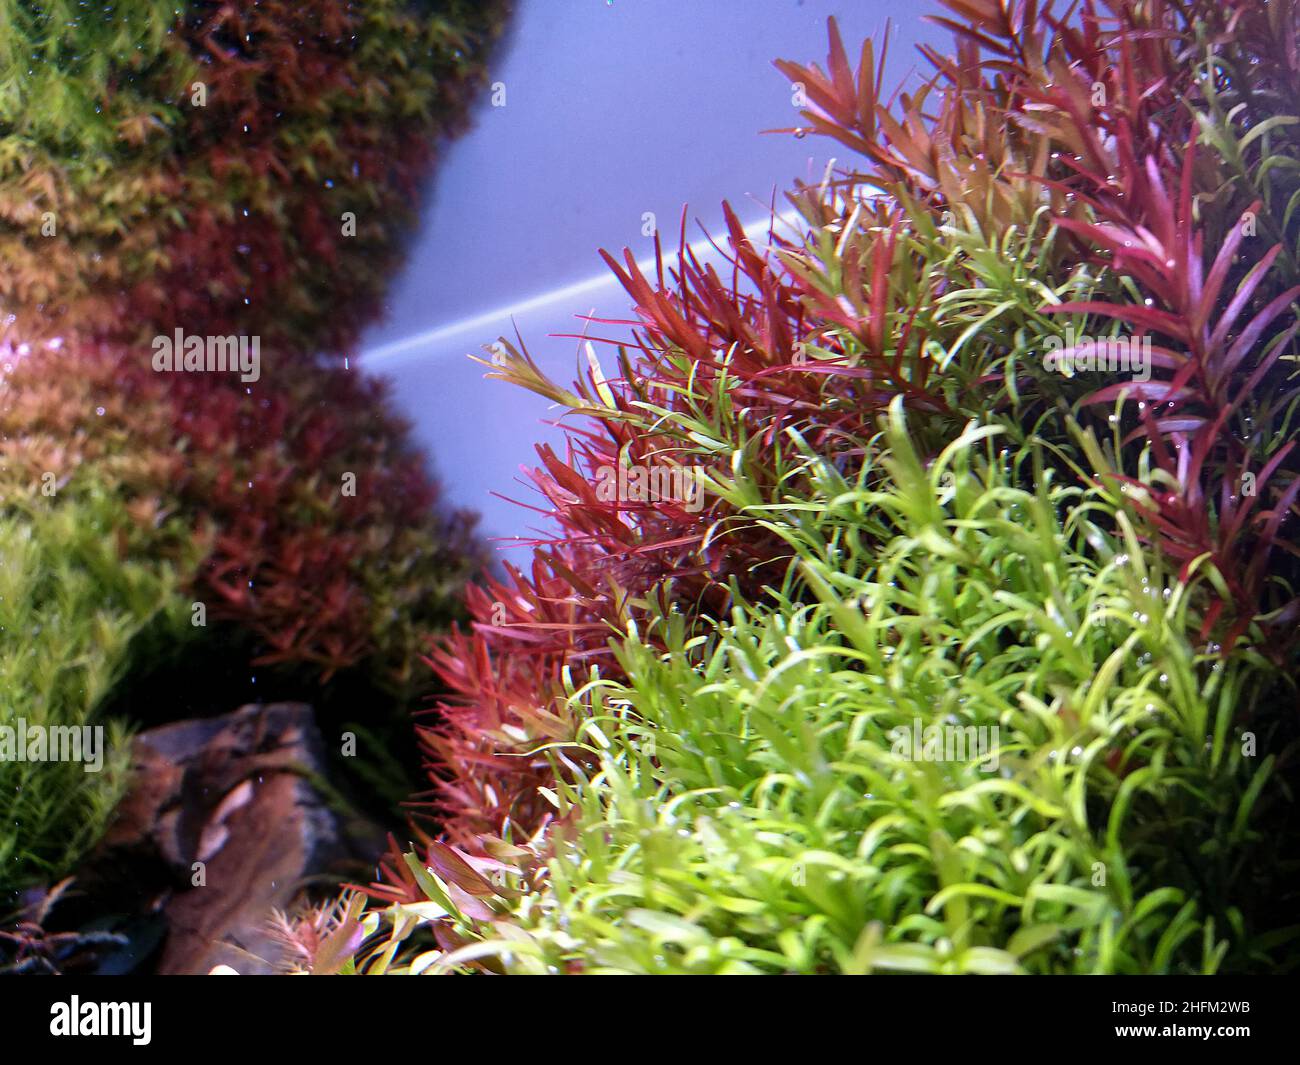 Rotala in the planted aquarium. Various green and red freshwater stem plants. Aquascape side view. Stock Photo